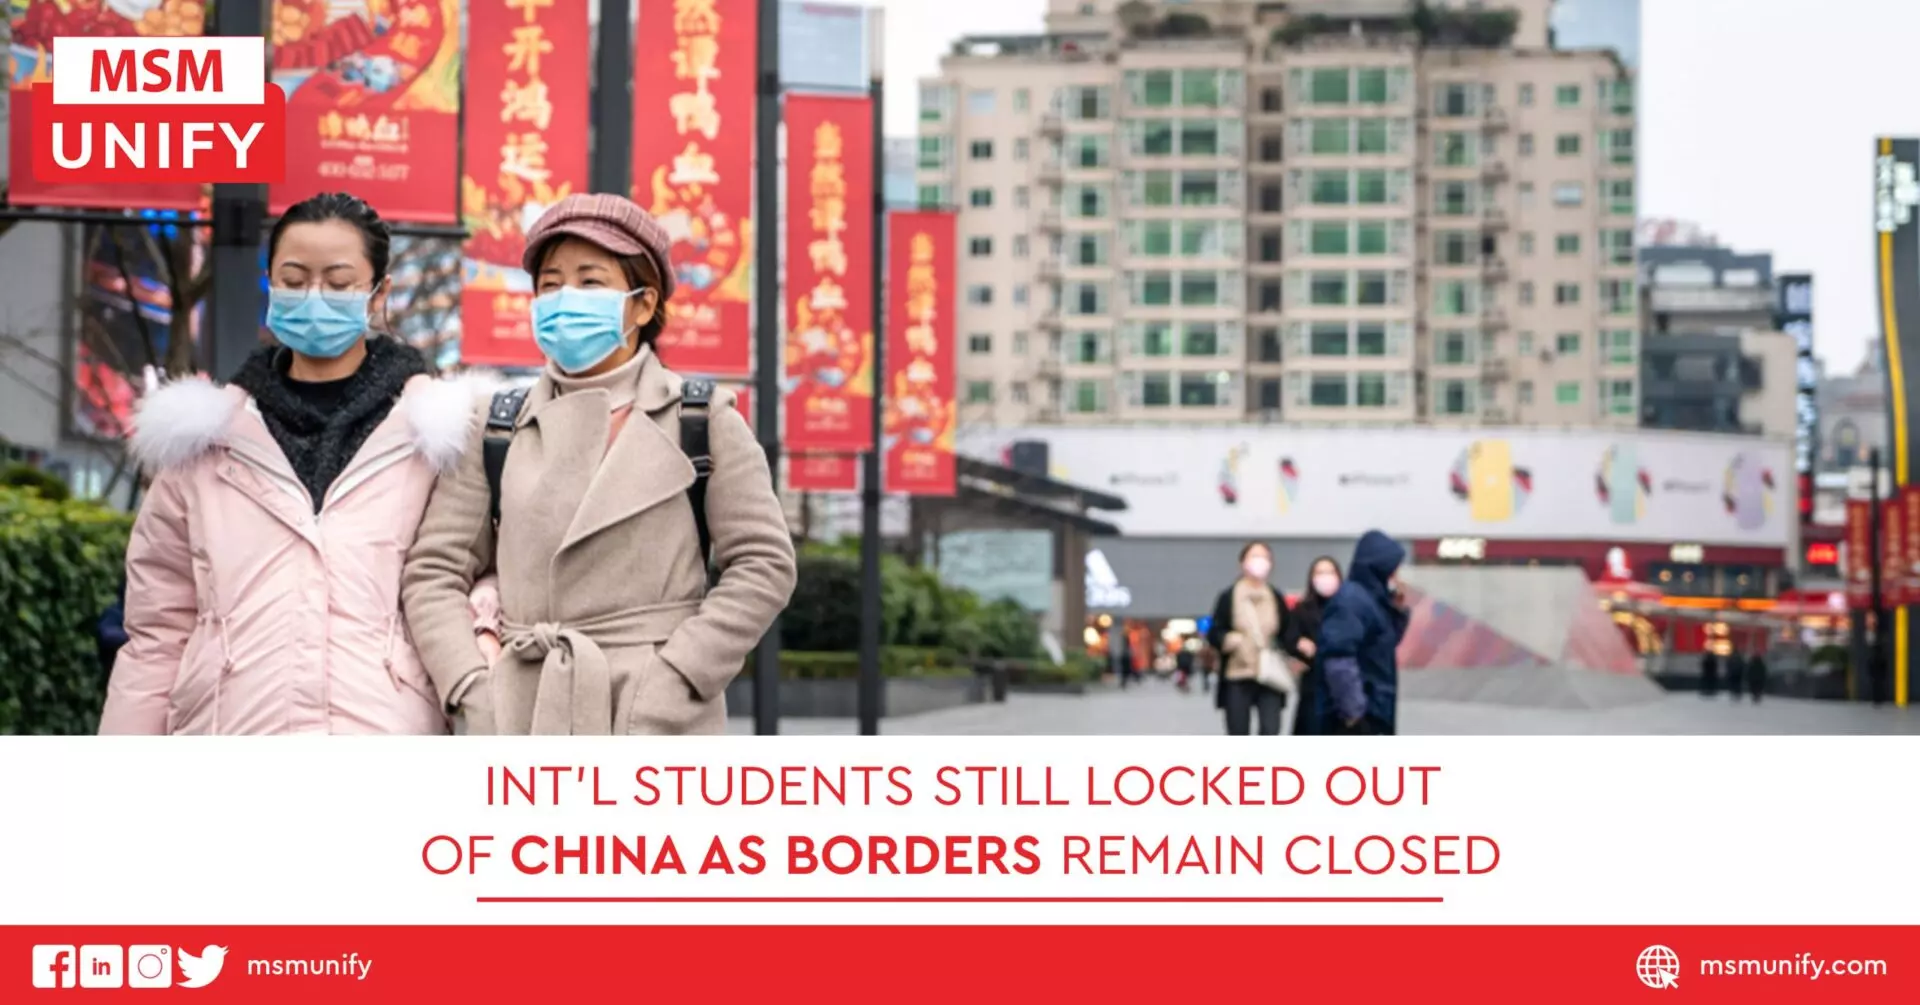 Intl Students Still Locked Out of China as Borders Remain Closed scaled 1